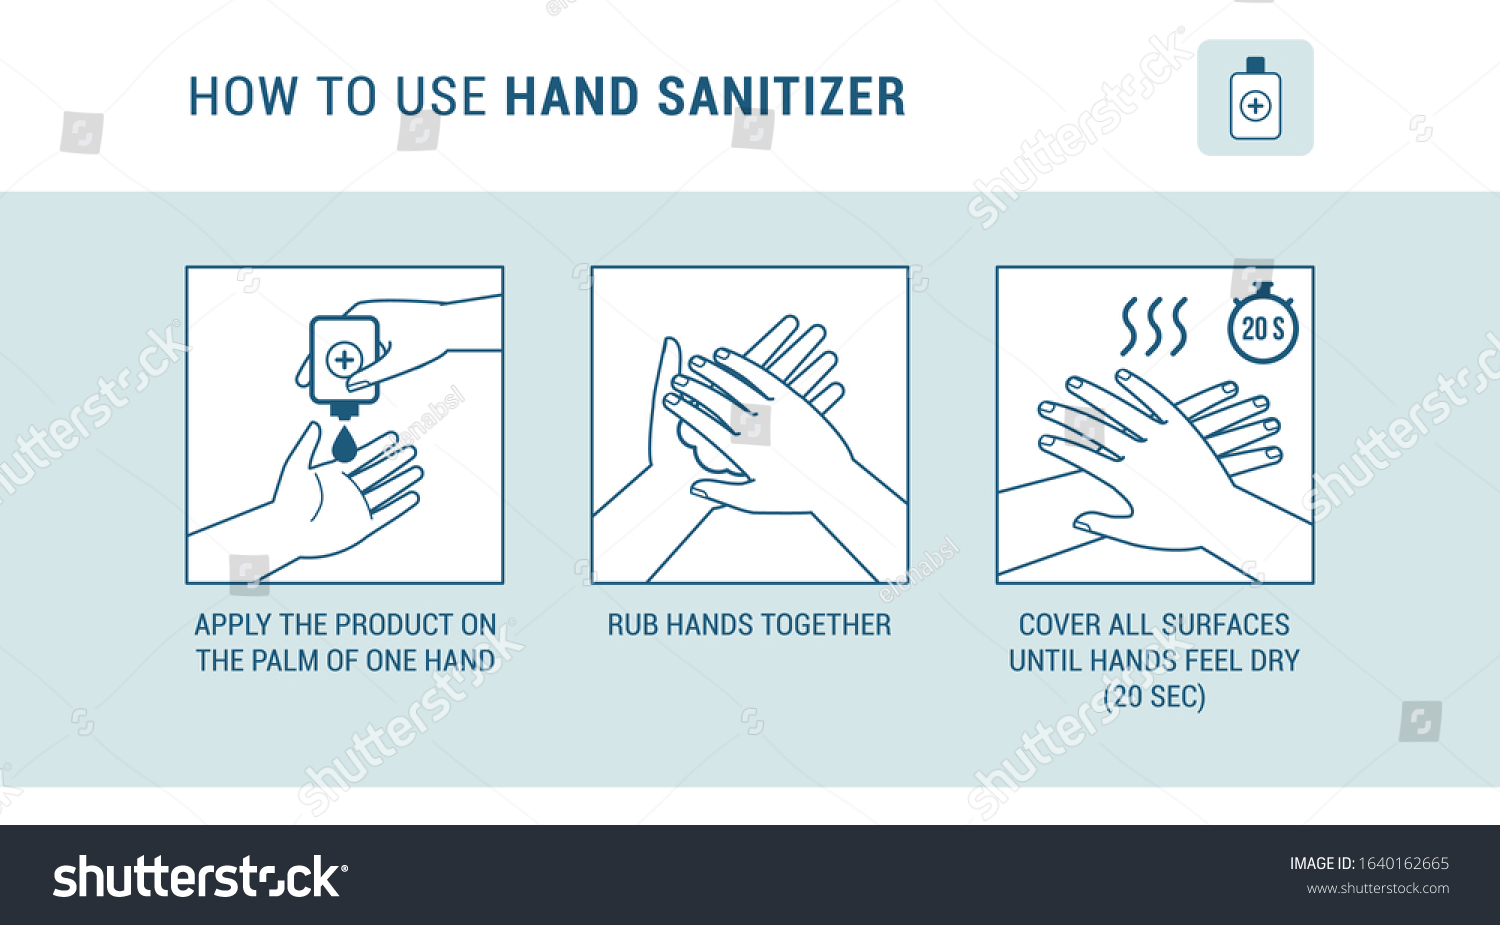 How to use hand sanitizer properly to clean and disinfect hands, medical infographic #1640162665